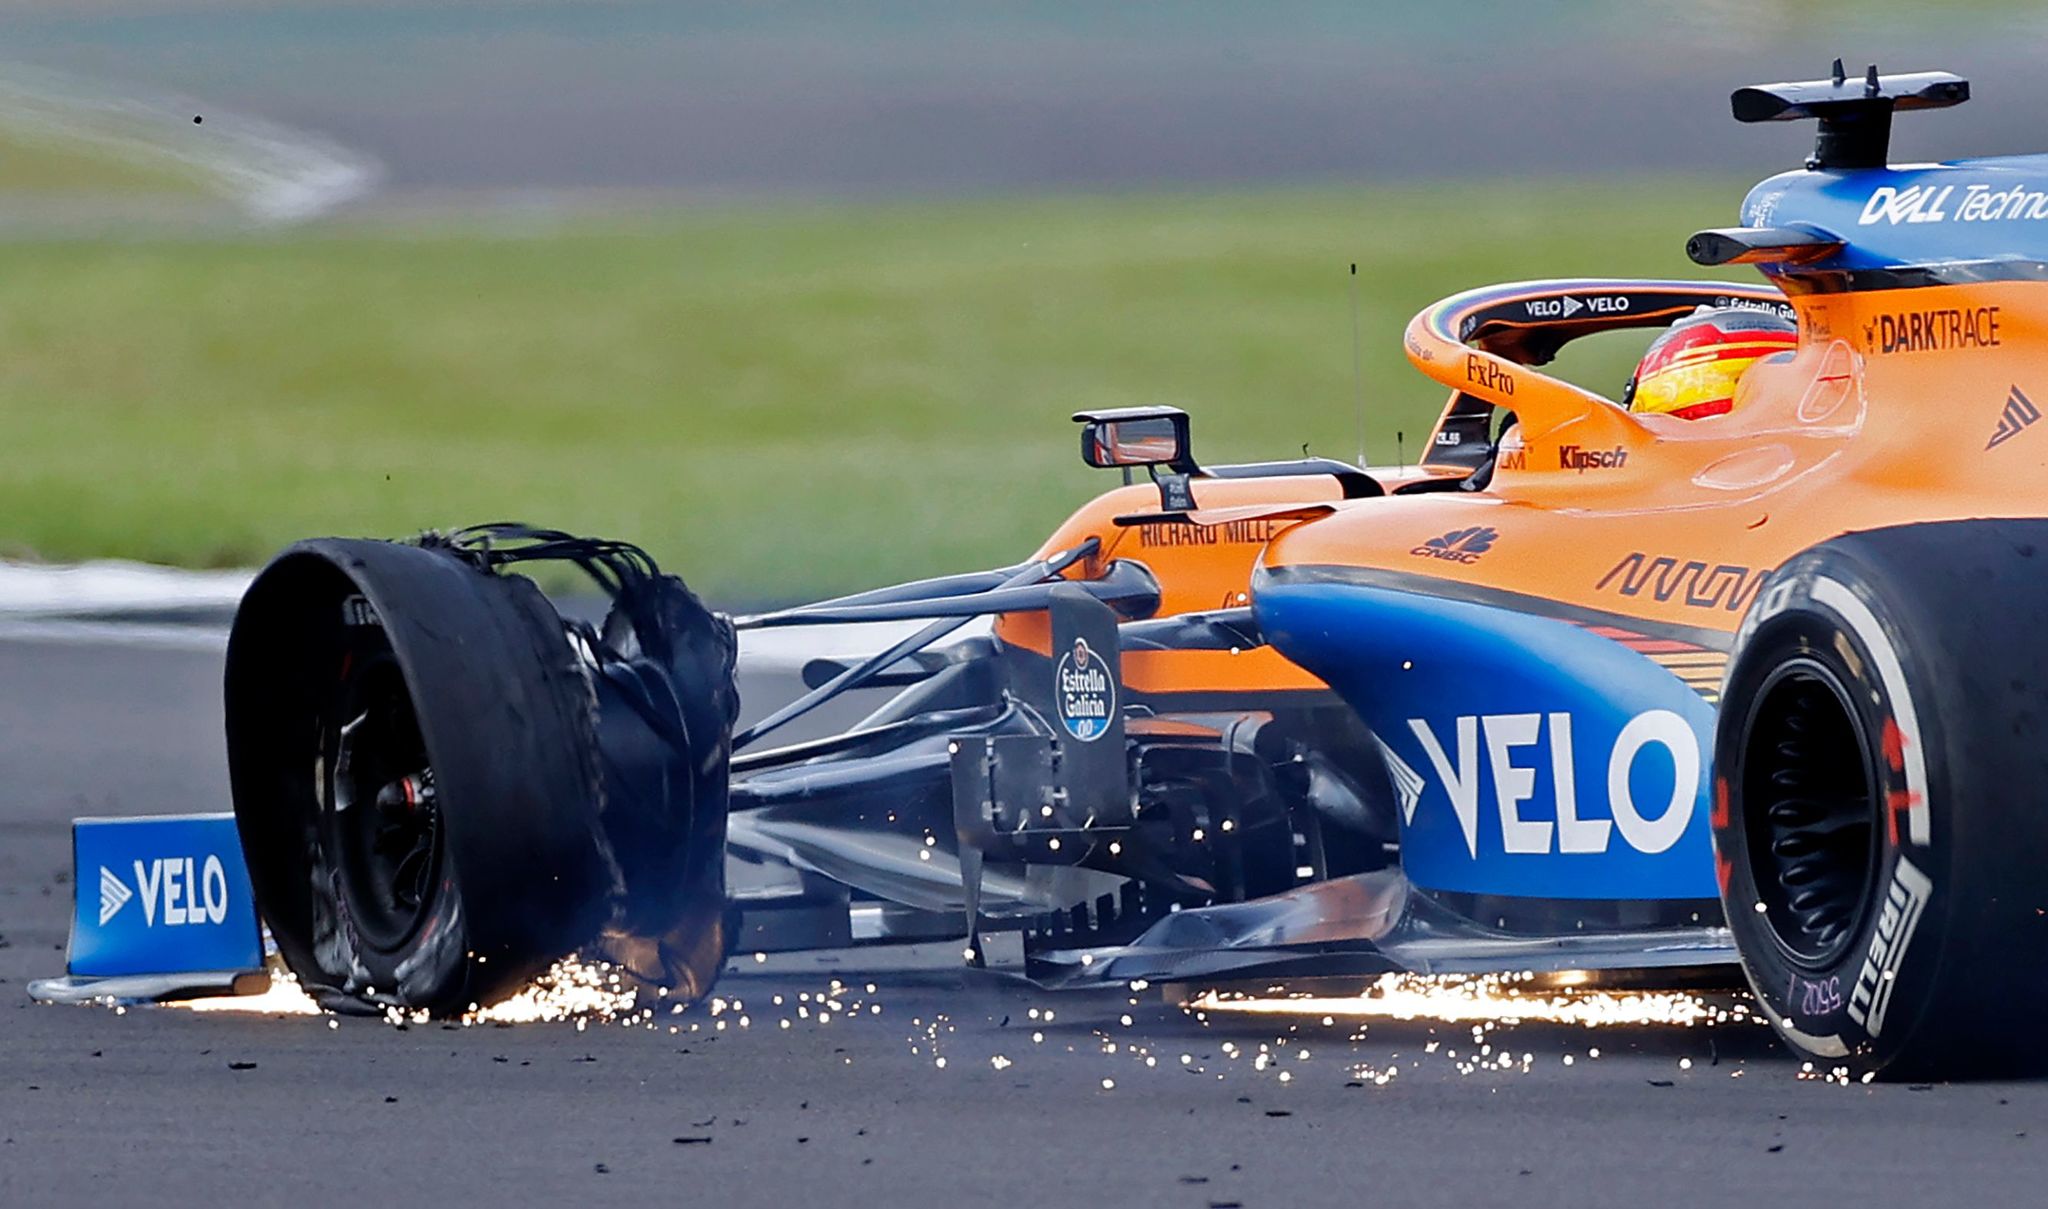 The punctured tyre of McLarens Spanish driver lt;HIT gt;Carlos lt;/HIT gt; lt;HIT gt;Sainz lt;/HIT gt; Jr is picture as he nears the finish of the Formula One British Grand Prix at the Silverstone motor racing circuit in Silverstone, central England on August 2, 2020. - Lewis Hamilton survived a dramatic finale to win the British Grand Prix on Sunday, just making it across the line on three tyres to beat a fast closing Max Verstappen on Red Bull. The defending world champion claimed his seventh British Grand Prix win as Ferarris Charles Leclerc came third and Daniel Ricciardo of Renault fourth. (Photo by ANDREW BOYERS / POOL / AFP)